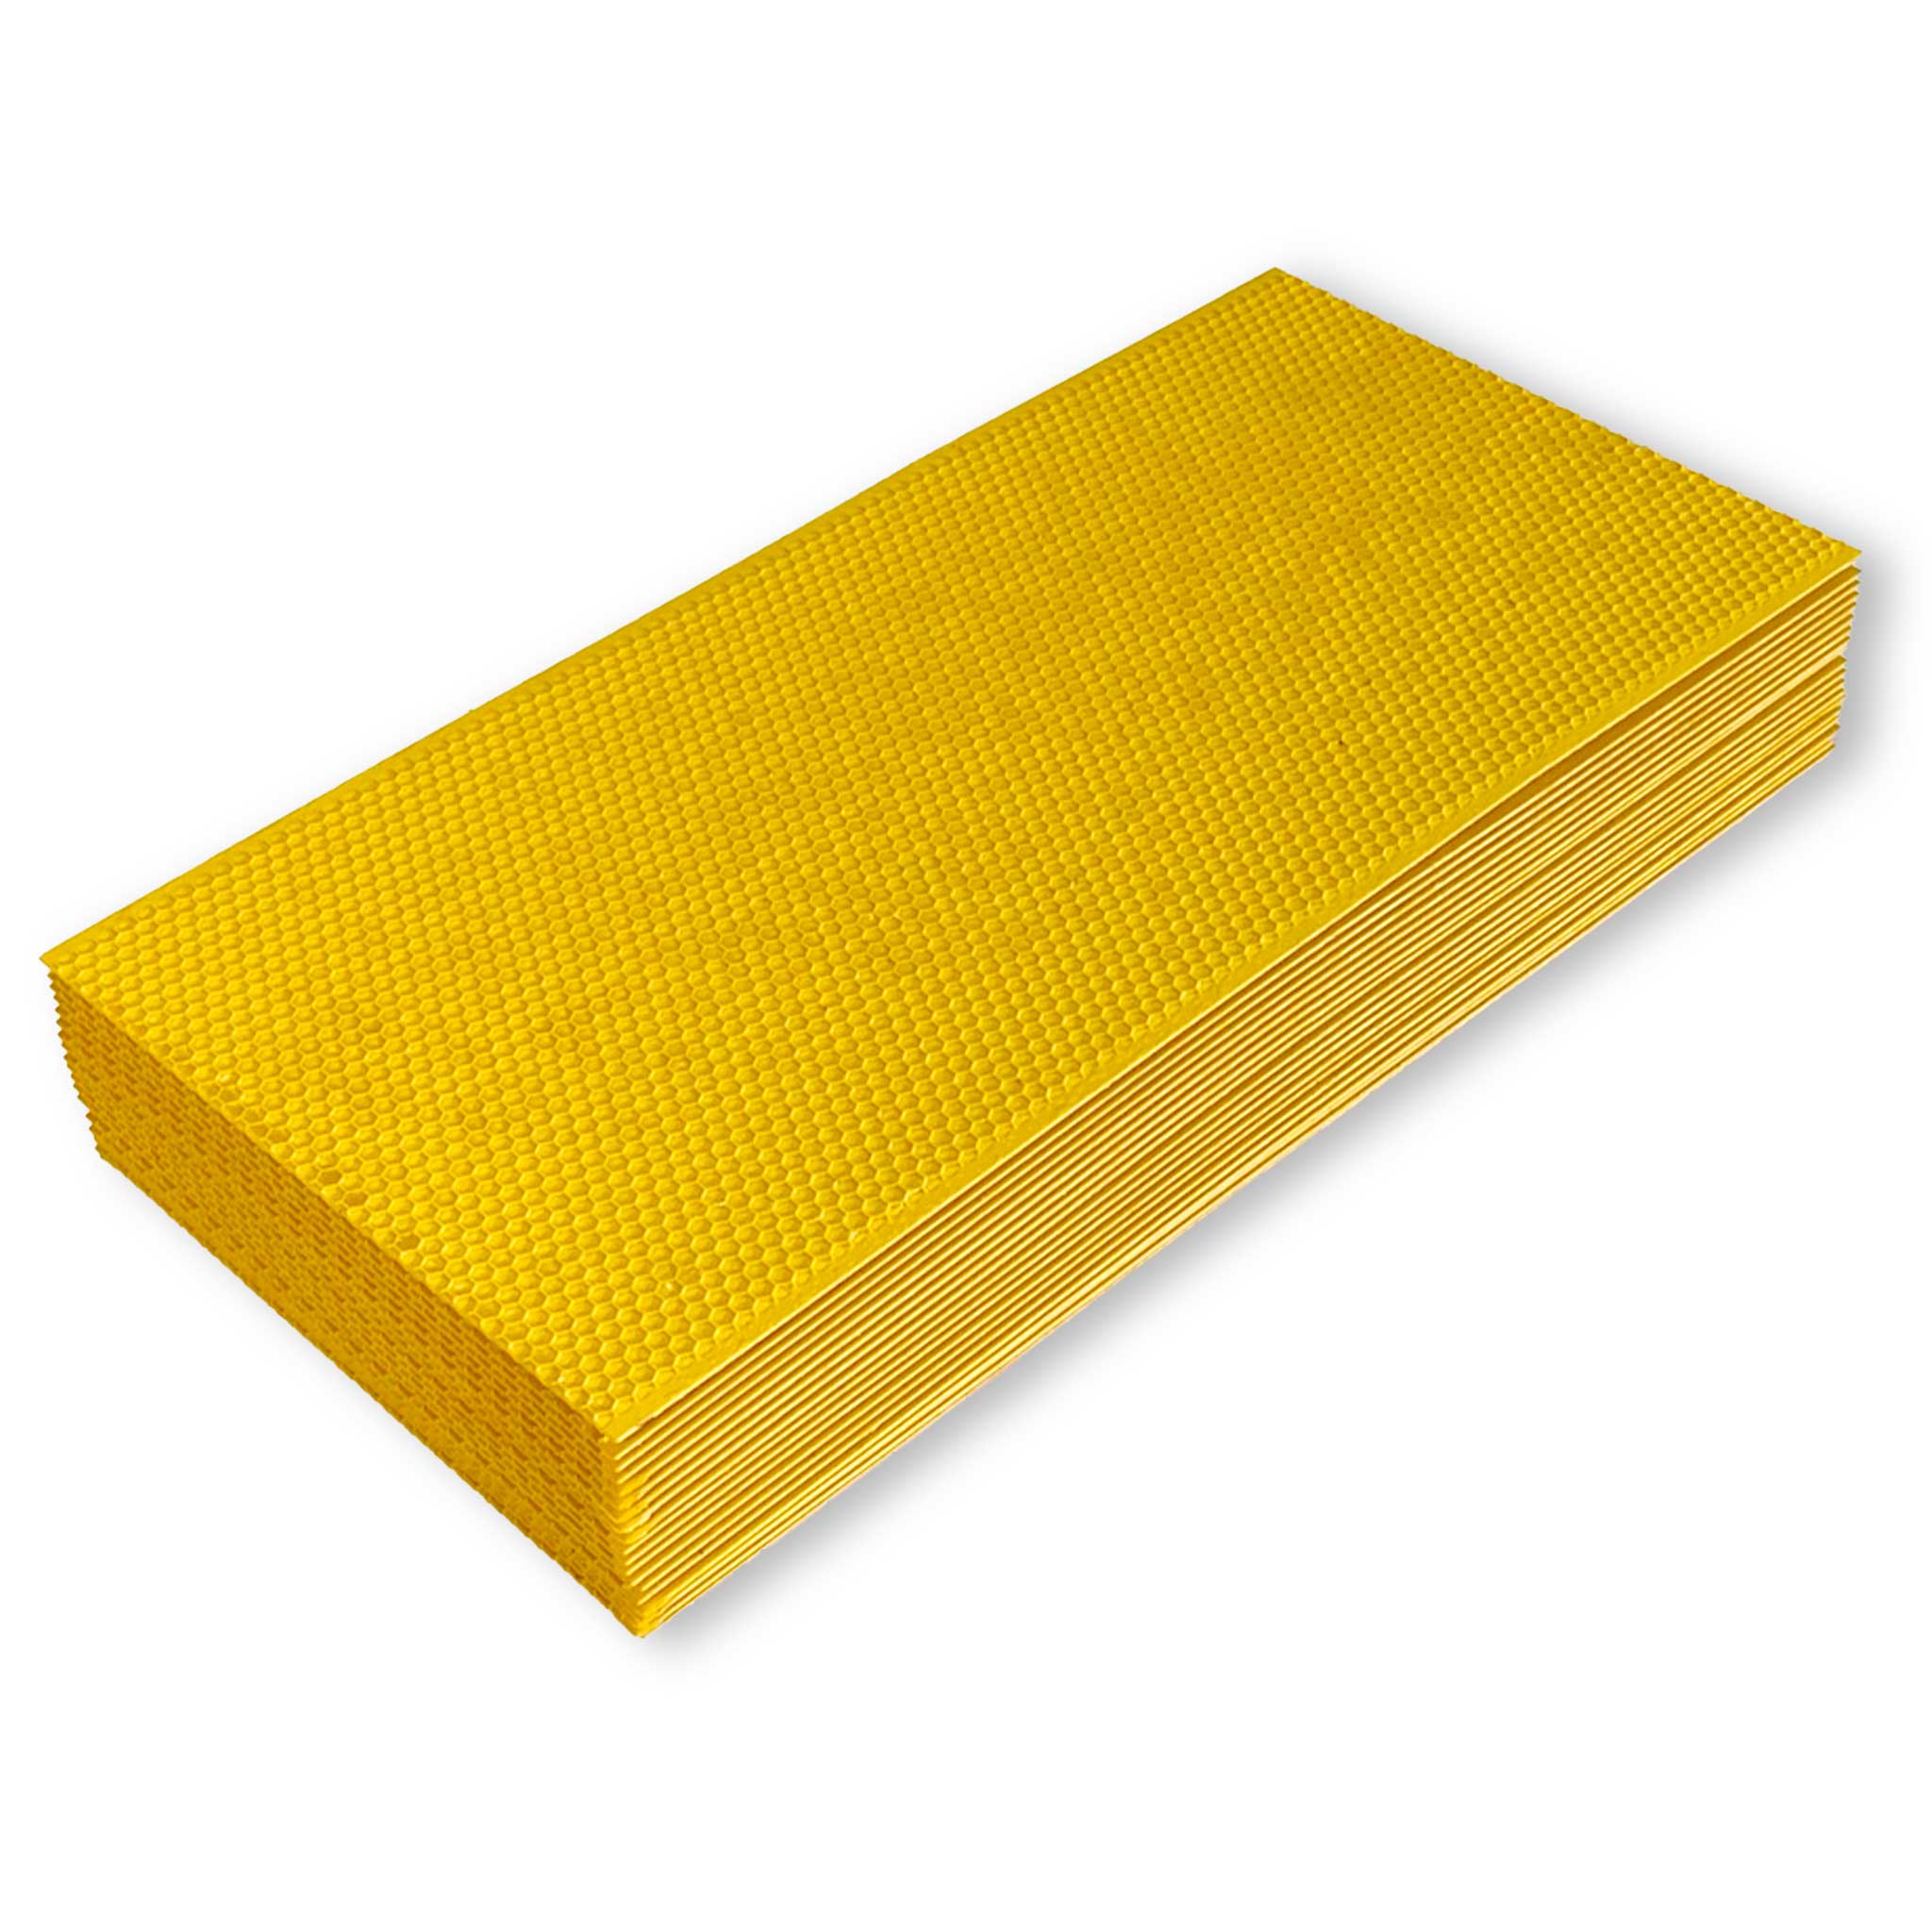 Triple Wax Coated Yellow Full Depth Plastic Foundation - Hive Parts collection by Buzzbee Beekeeping Supplies